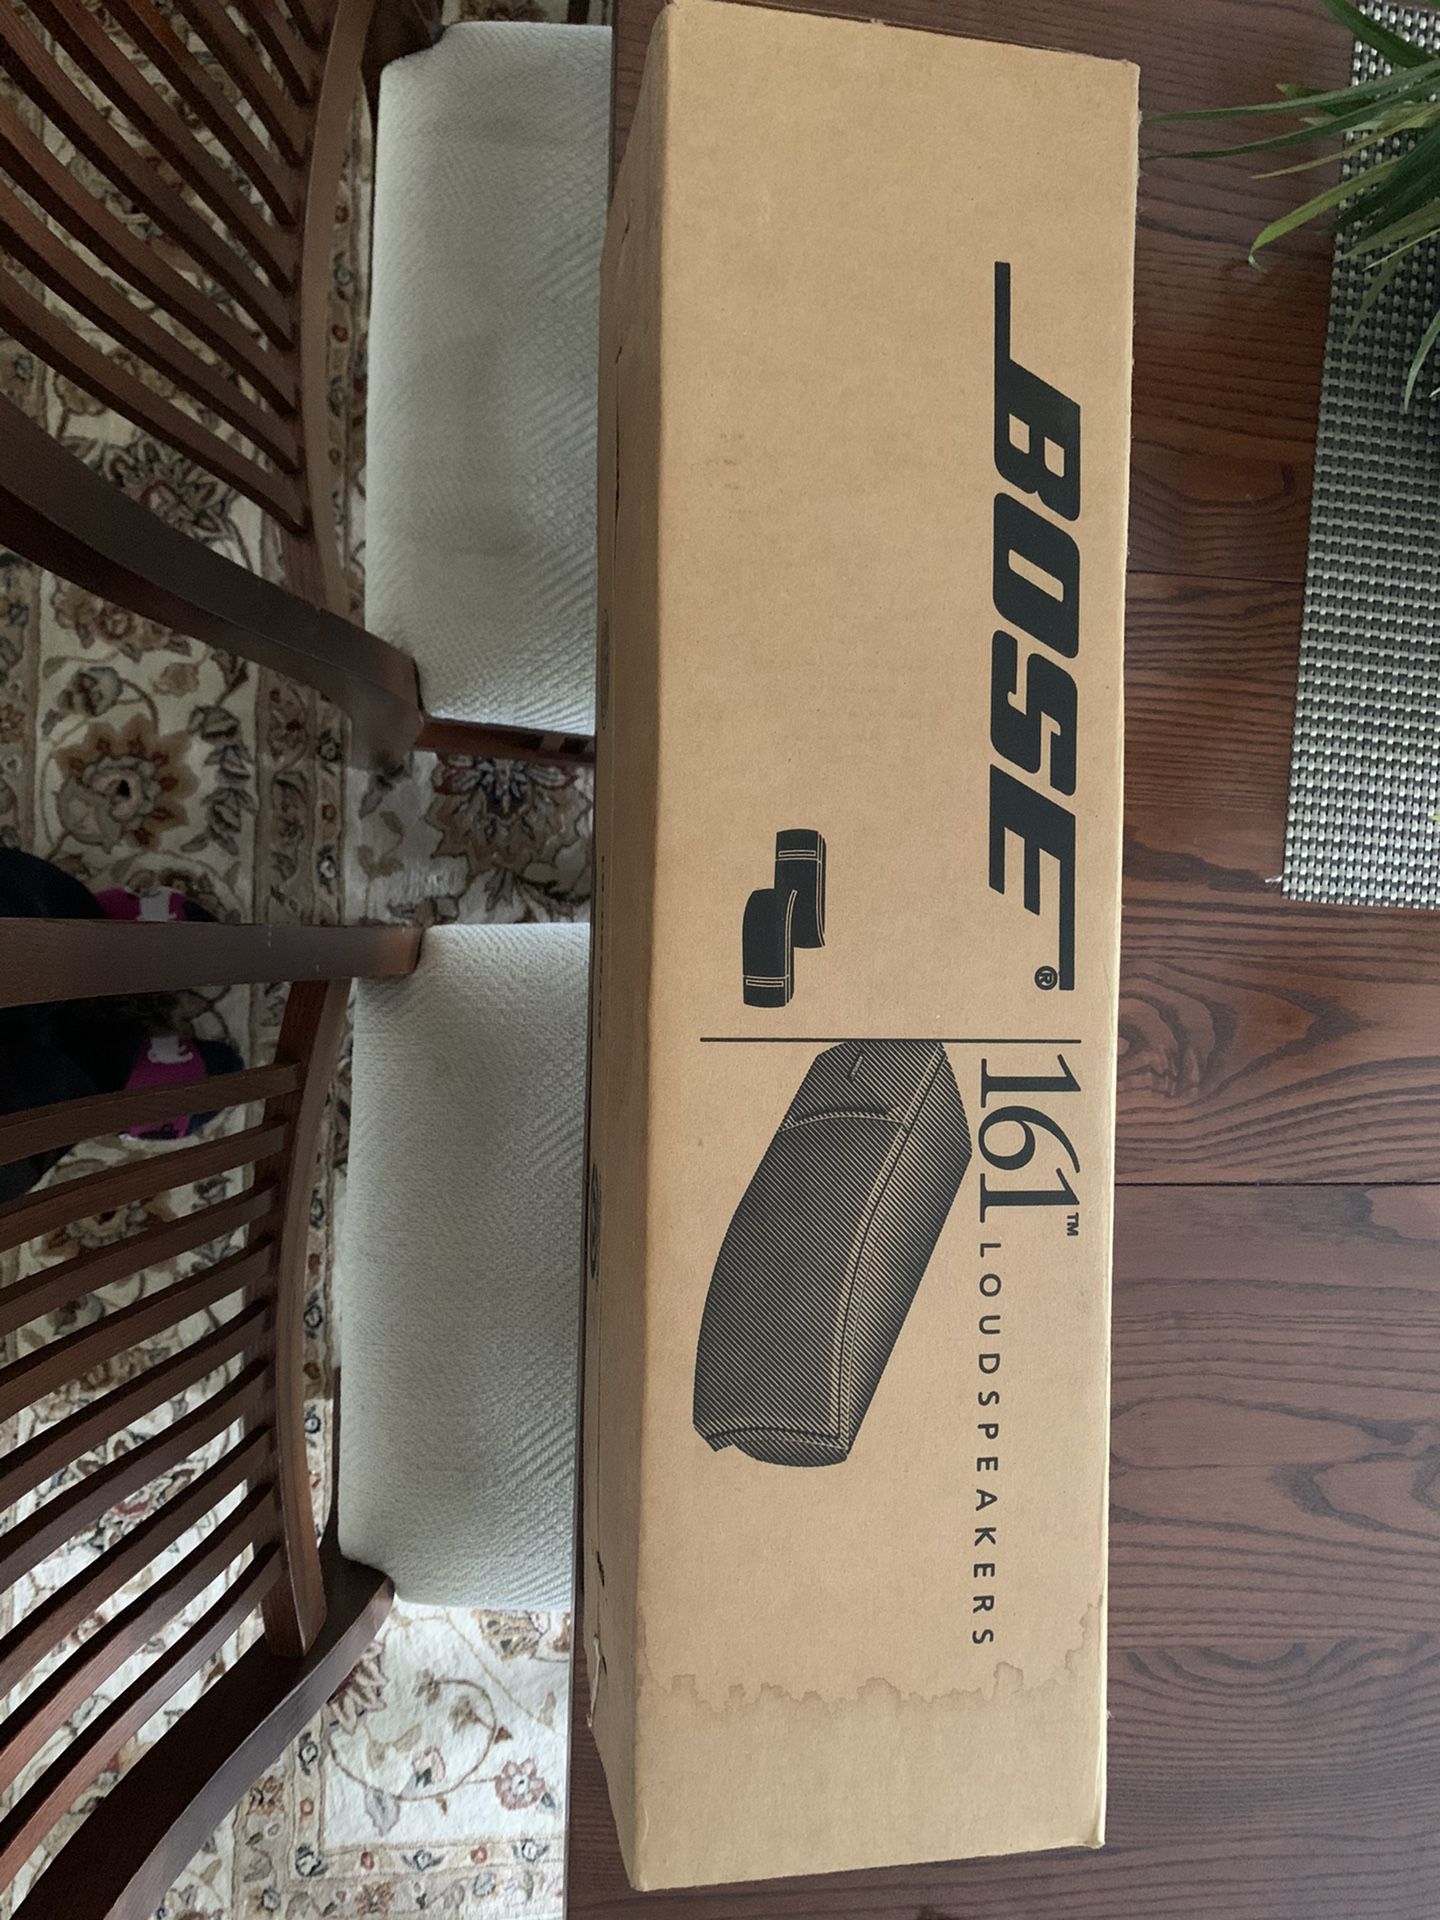 Brand New Bose speakers. Still in their boxes. 2 pairs, $100 per pair.